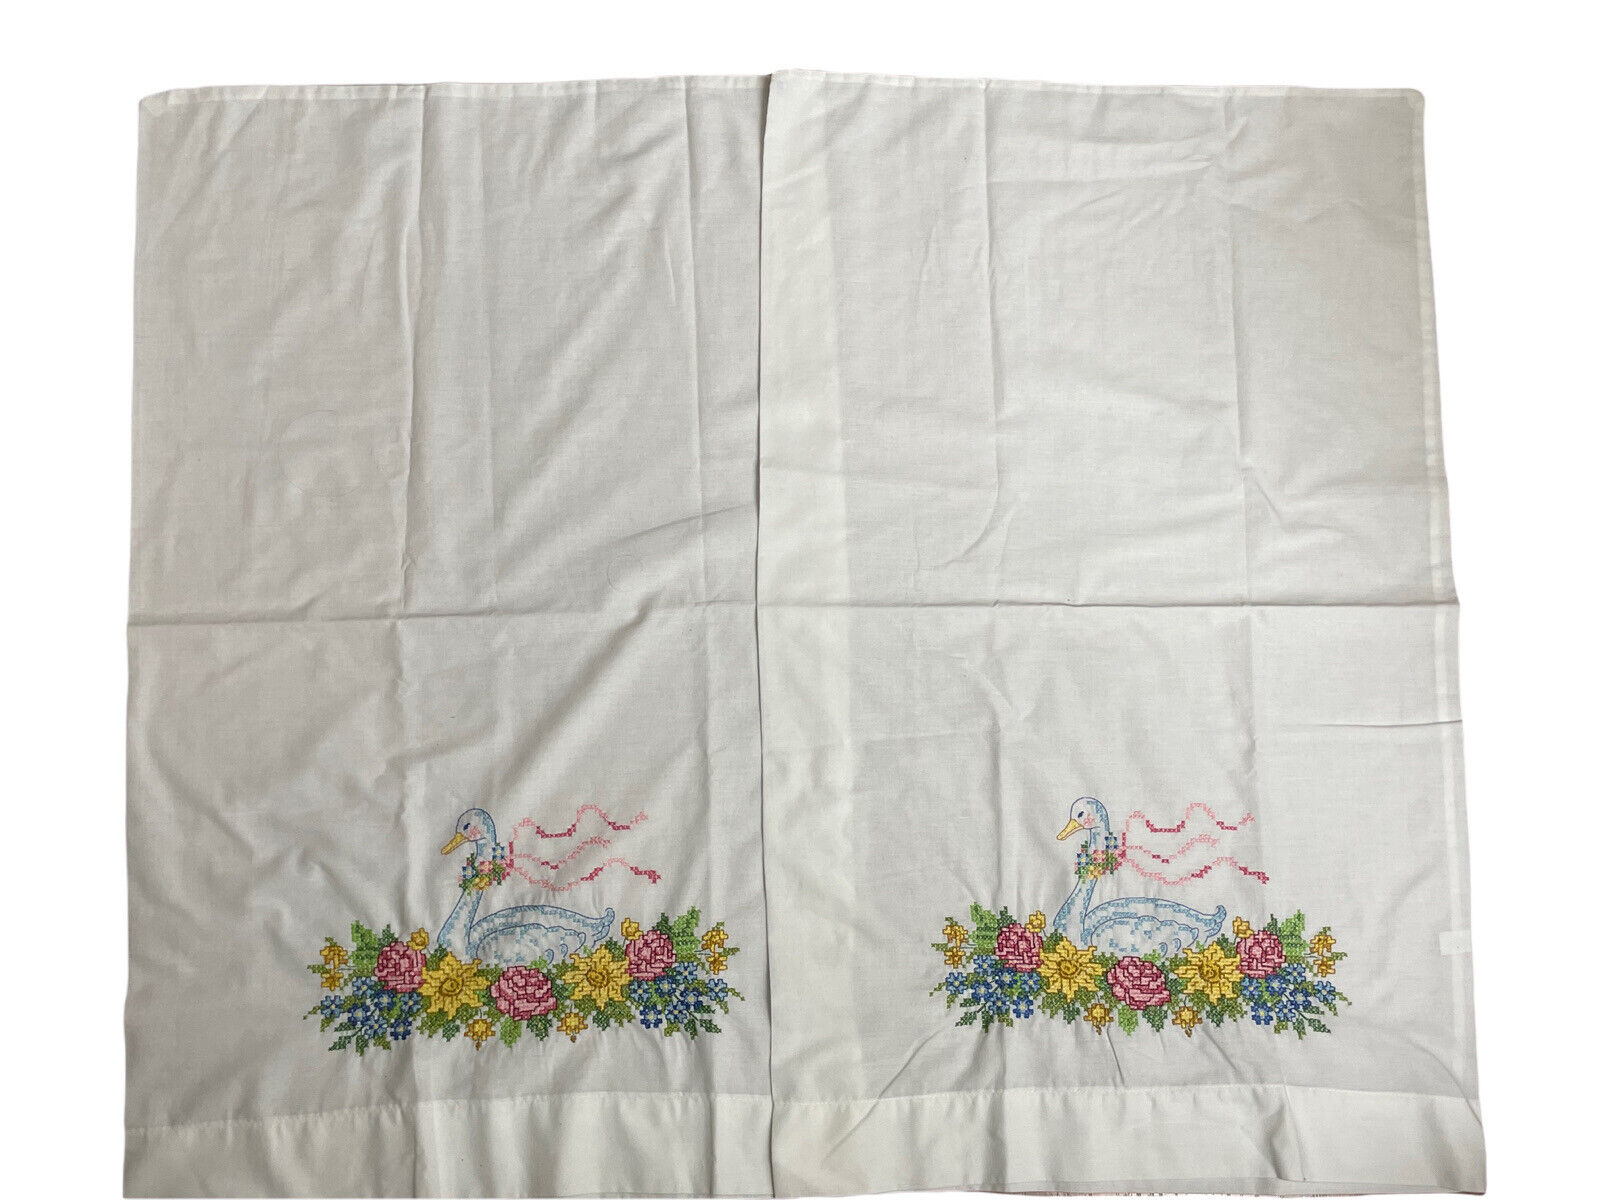 Floral Swans Pillowcases Set Hand Embroidered Cross Stitch 31.5" X 19.5" Each